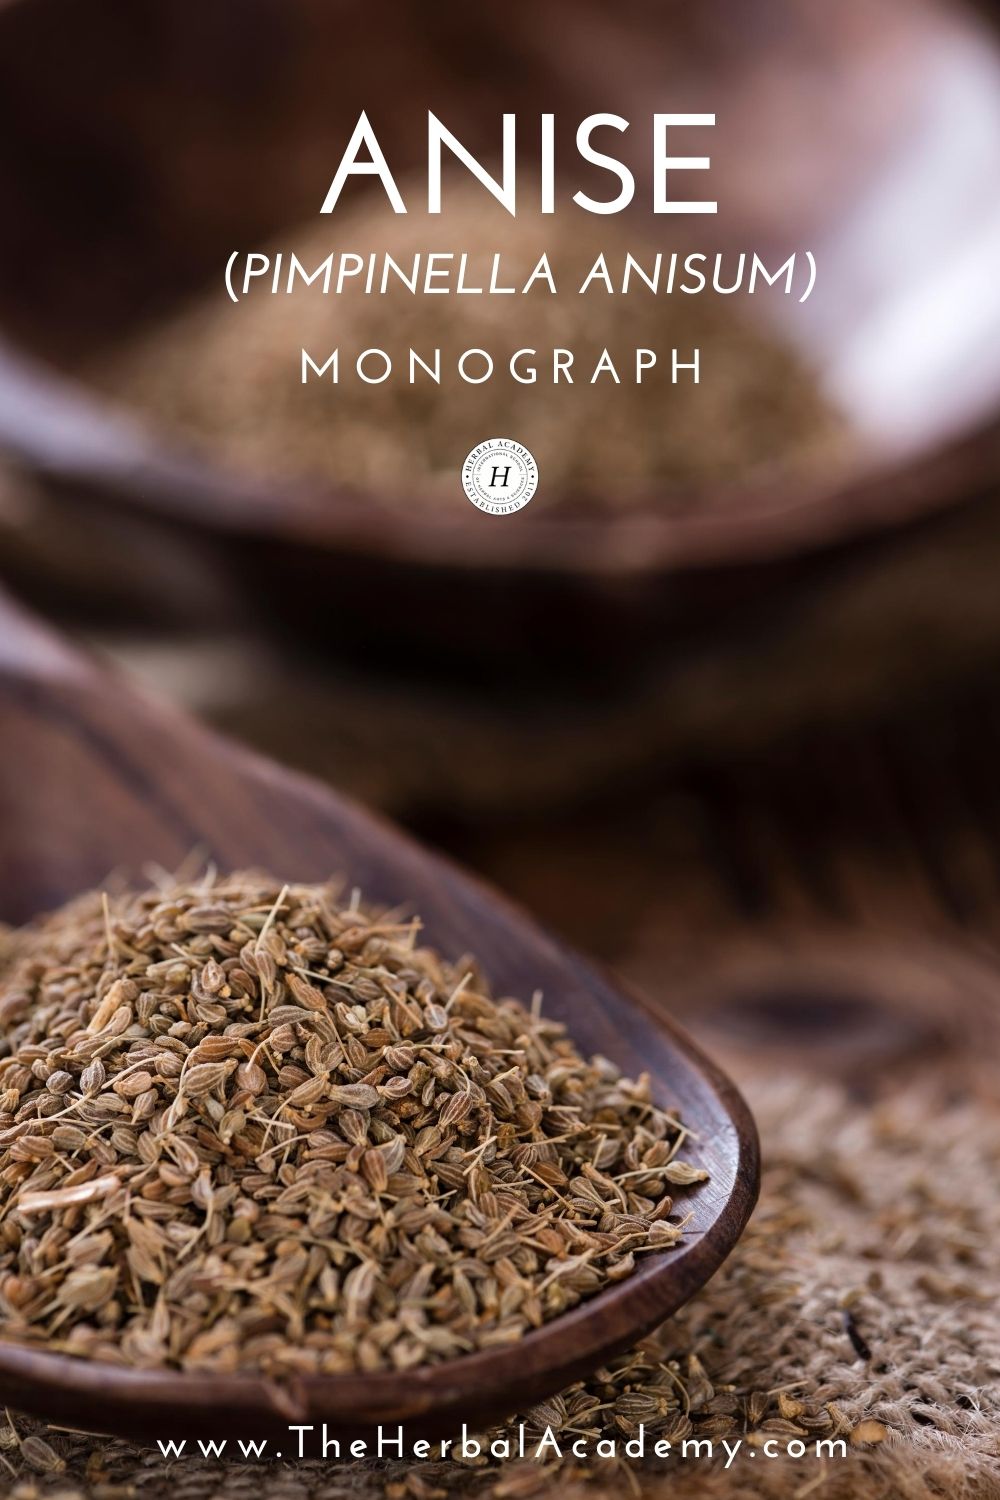 Anise Monograph: Pimpinella Anisum | Herbal Academy | In this anise monograph, you'll learn the history of this fascinating plant along with botanical descriptions and modern uses. 